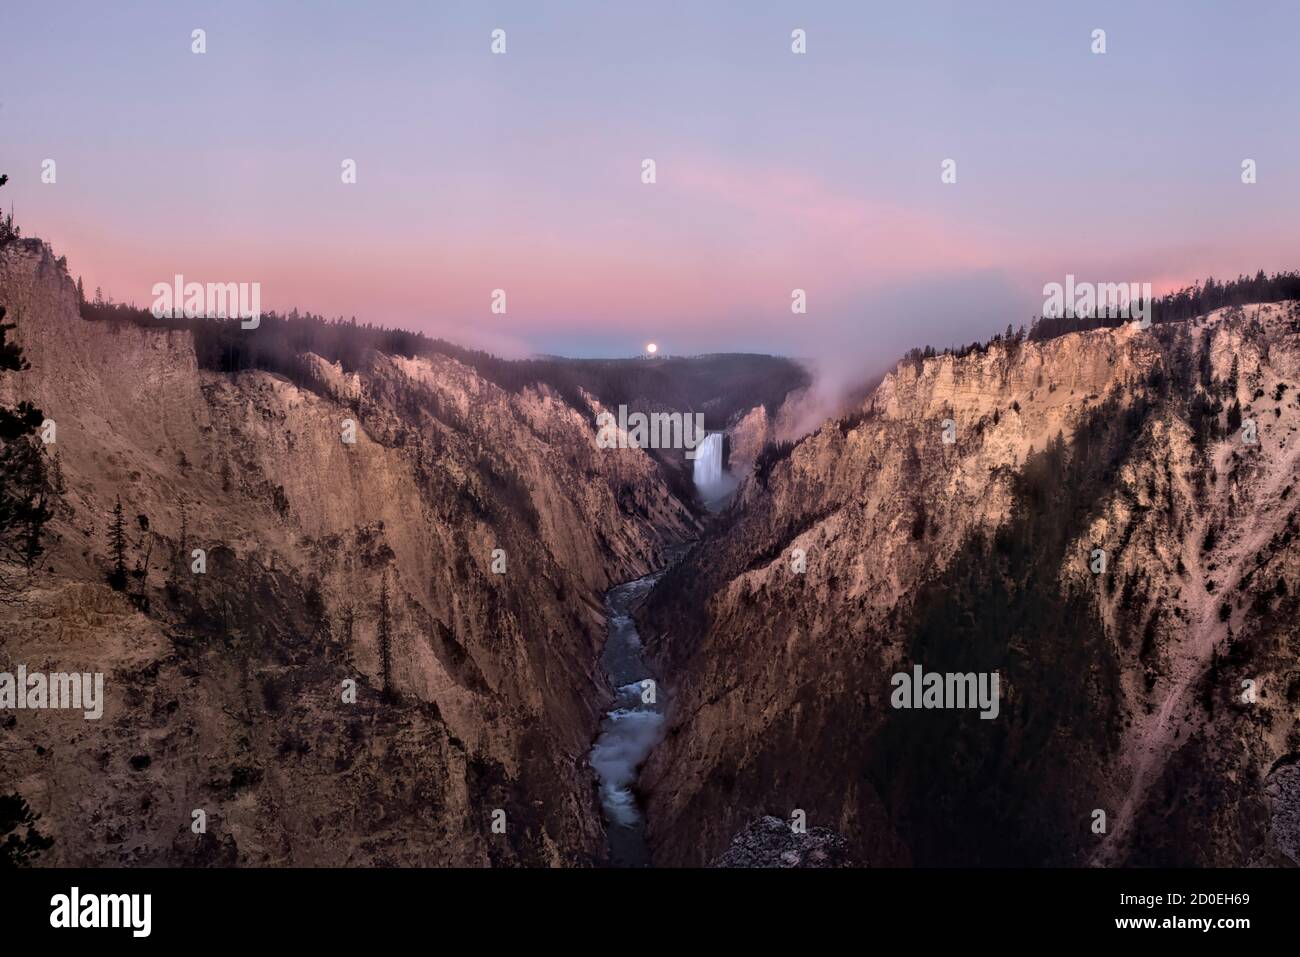 Moon set at sunrise, Lower Falls of the Yellowstone River and Grand Canyon, Yellowstone National Park, Wyoming, USA Stock Photo